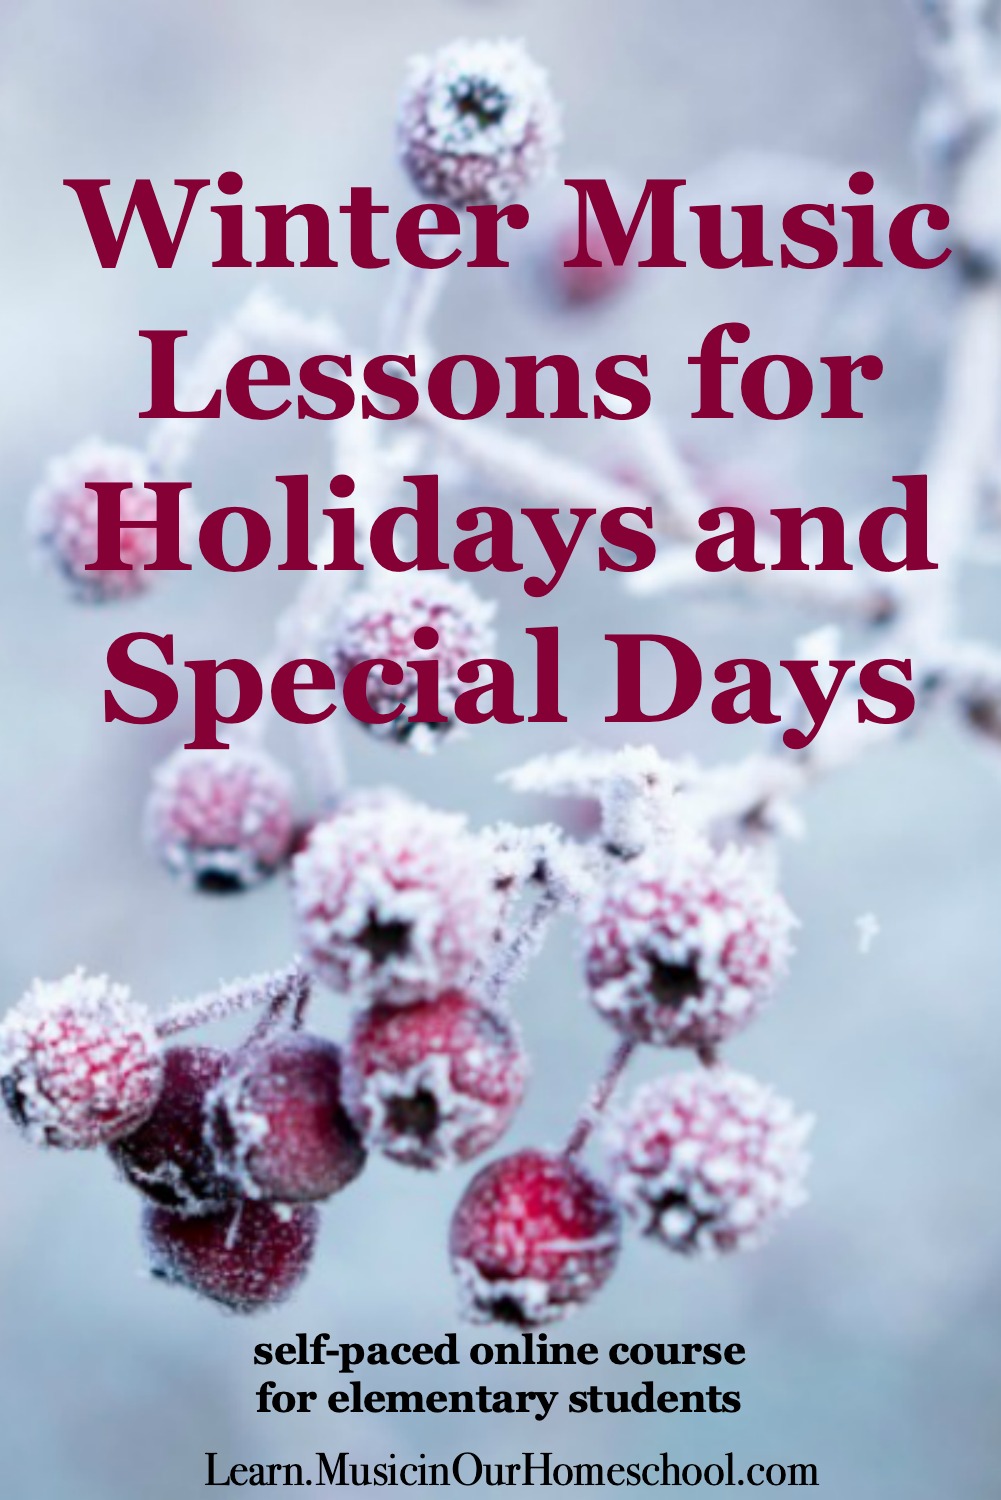 Winter Music Lessons for Holidays and Special Days is an online course to connect music to 12 winter holidays and special days. #elementary #generalmusic